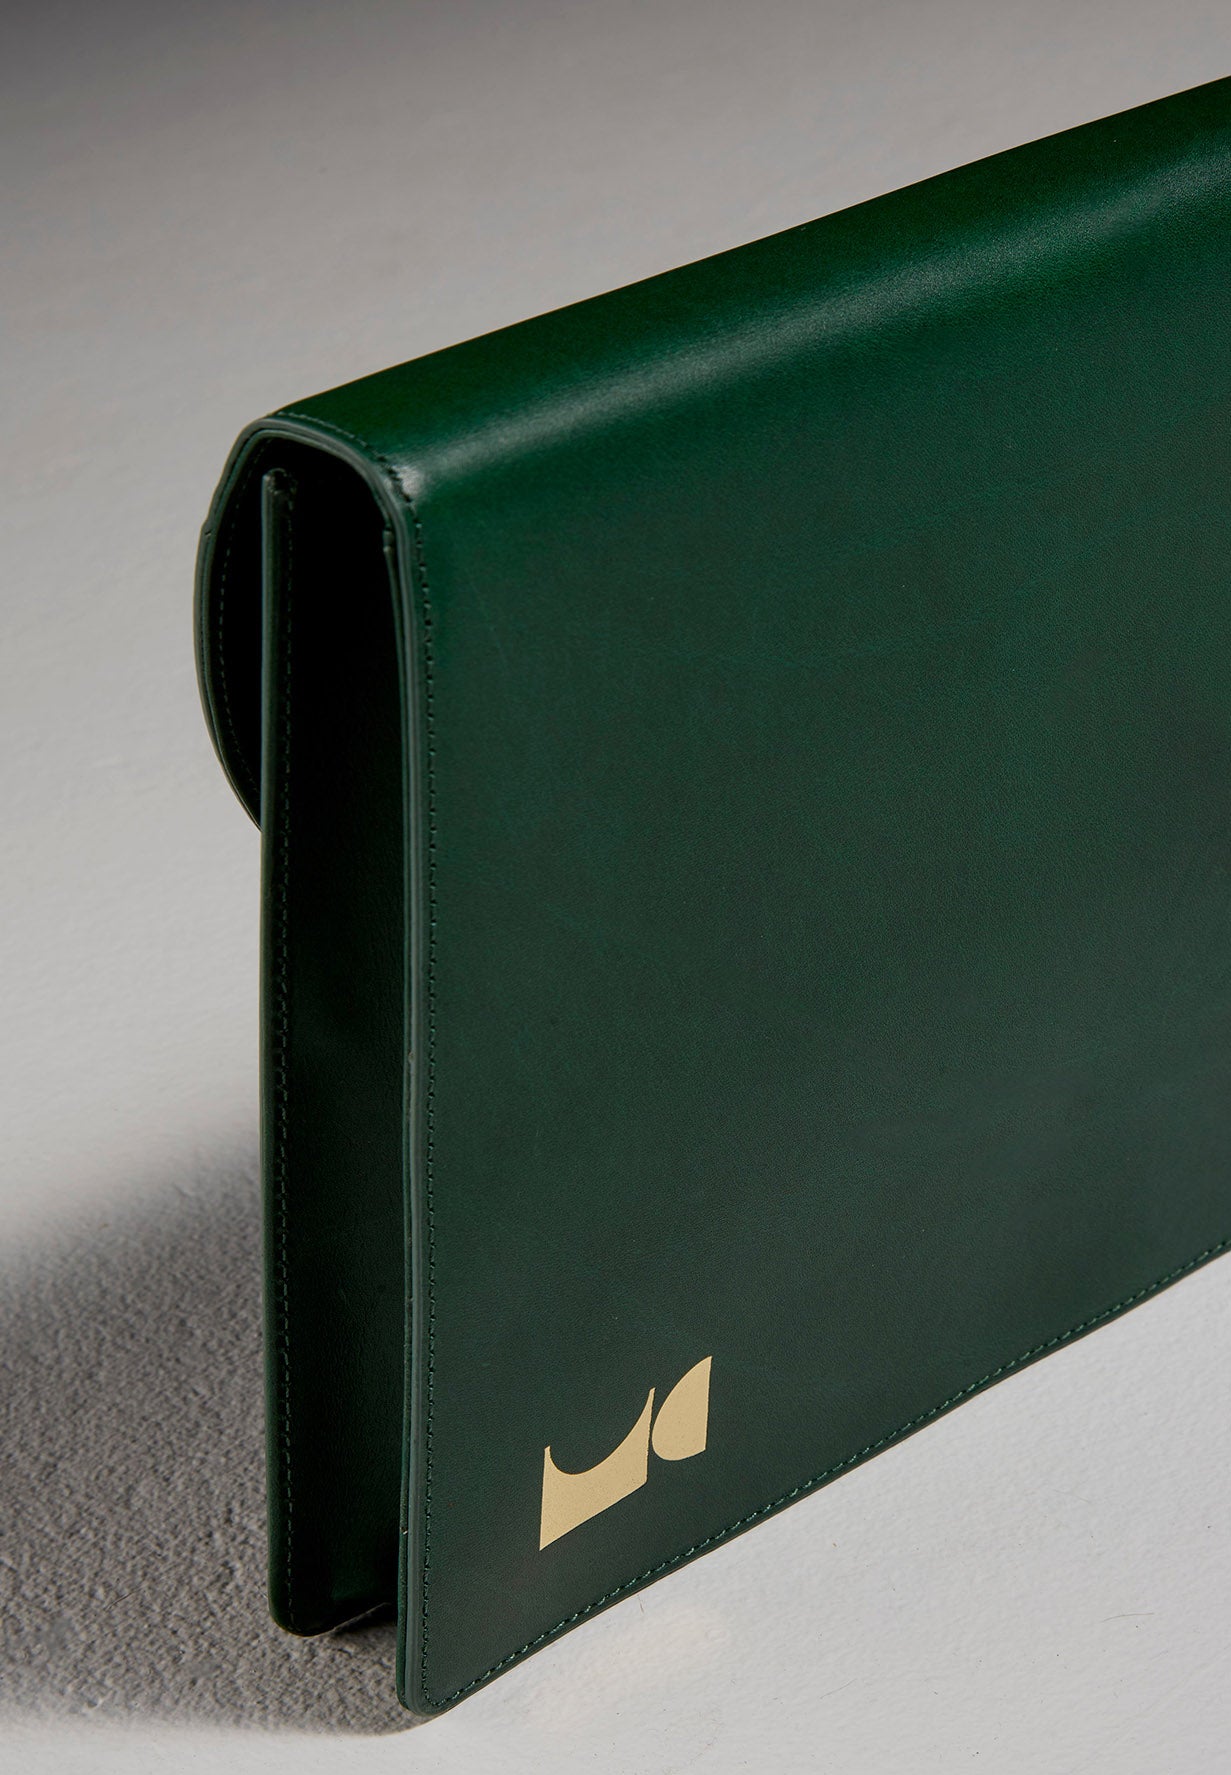 Angled view of green leather document folio sitting in front of black backdrop